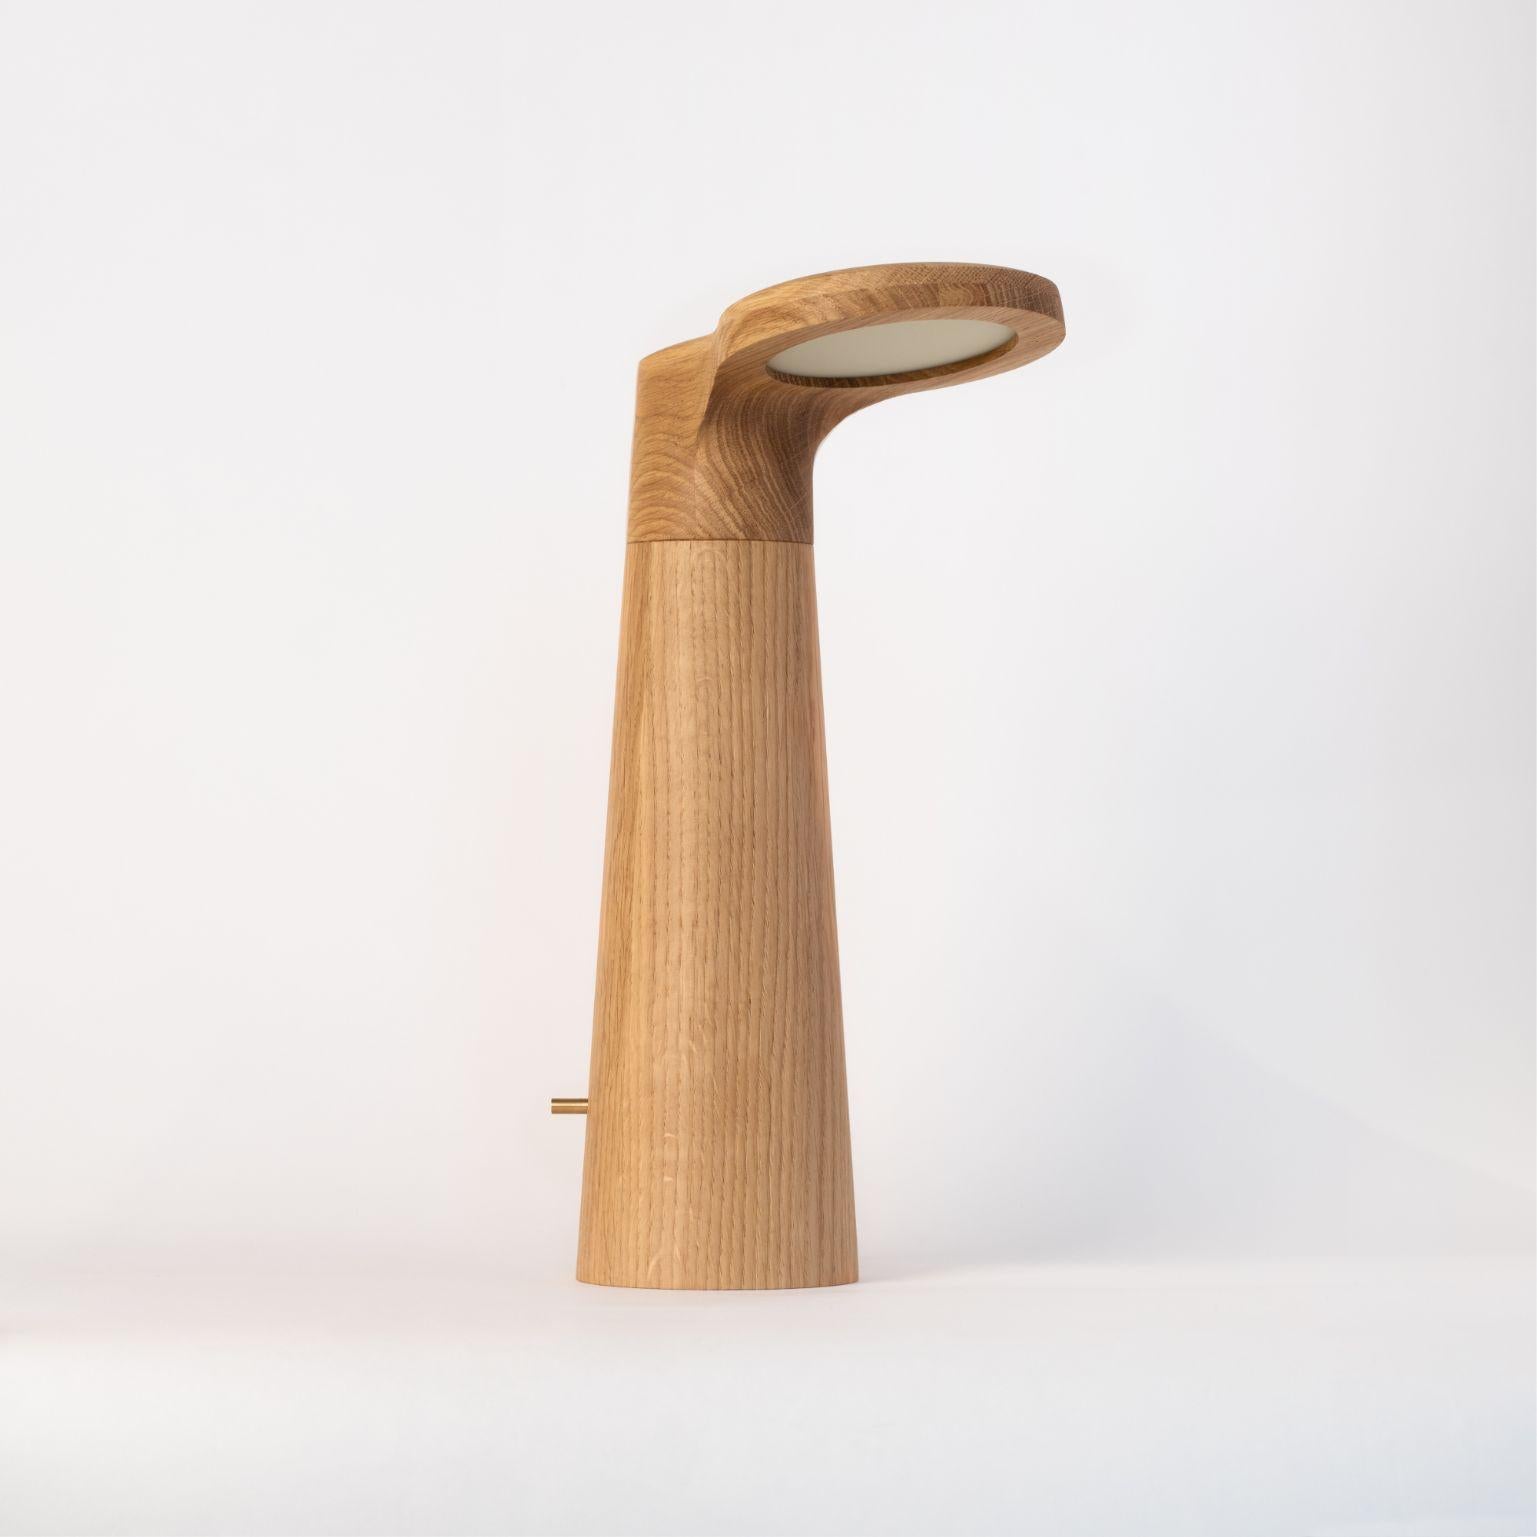 Oak - Studio light by Isato Prugger
Dimensions: 37 x 22 x 13 cm
Materials: oak
Limited edition of 100

Also available in Wenge Wood, Olive Wood, Canaletto Walnut, Padouk, White Ash. All our lamps can be wired according to each country. If sold